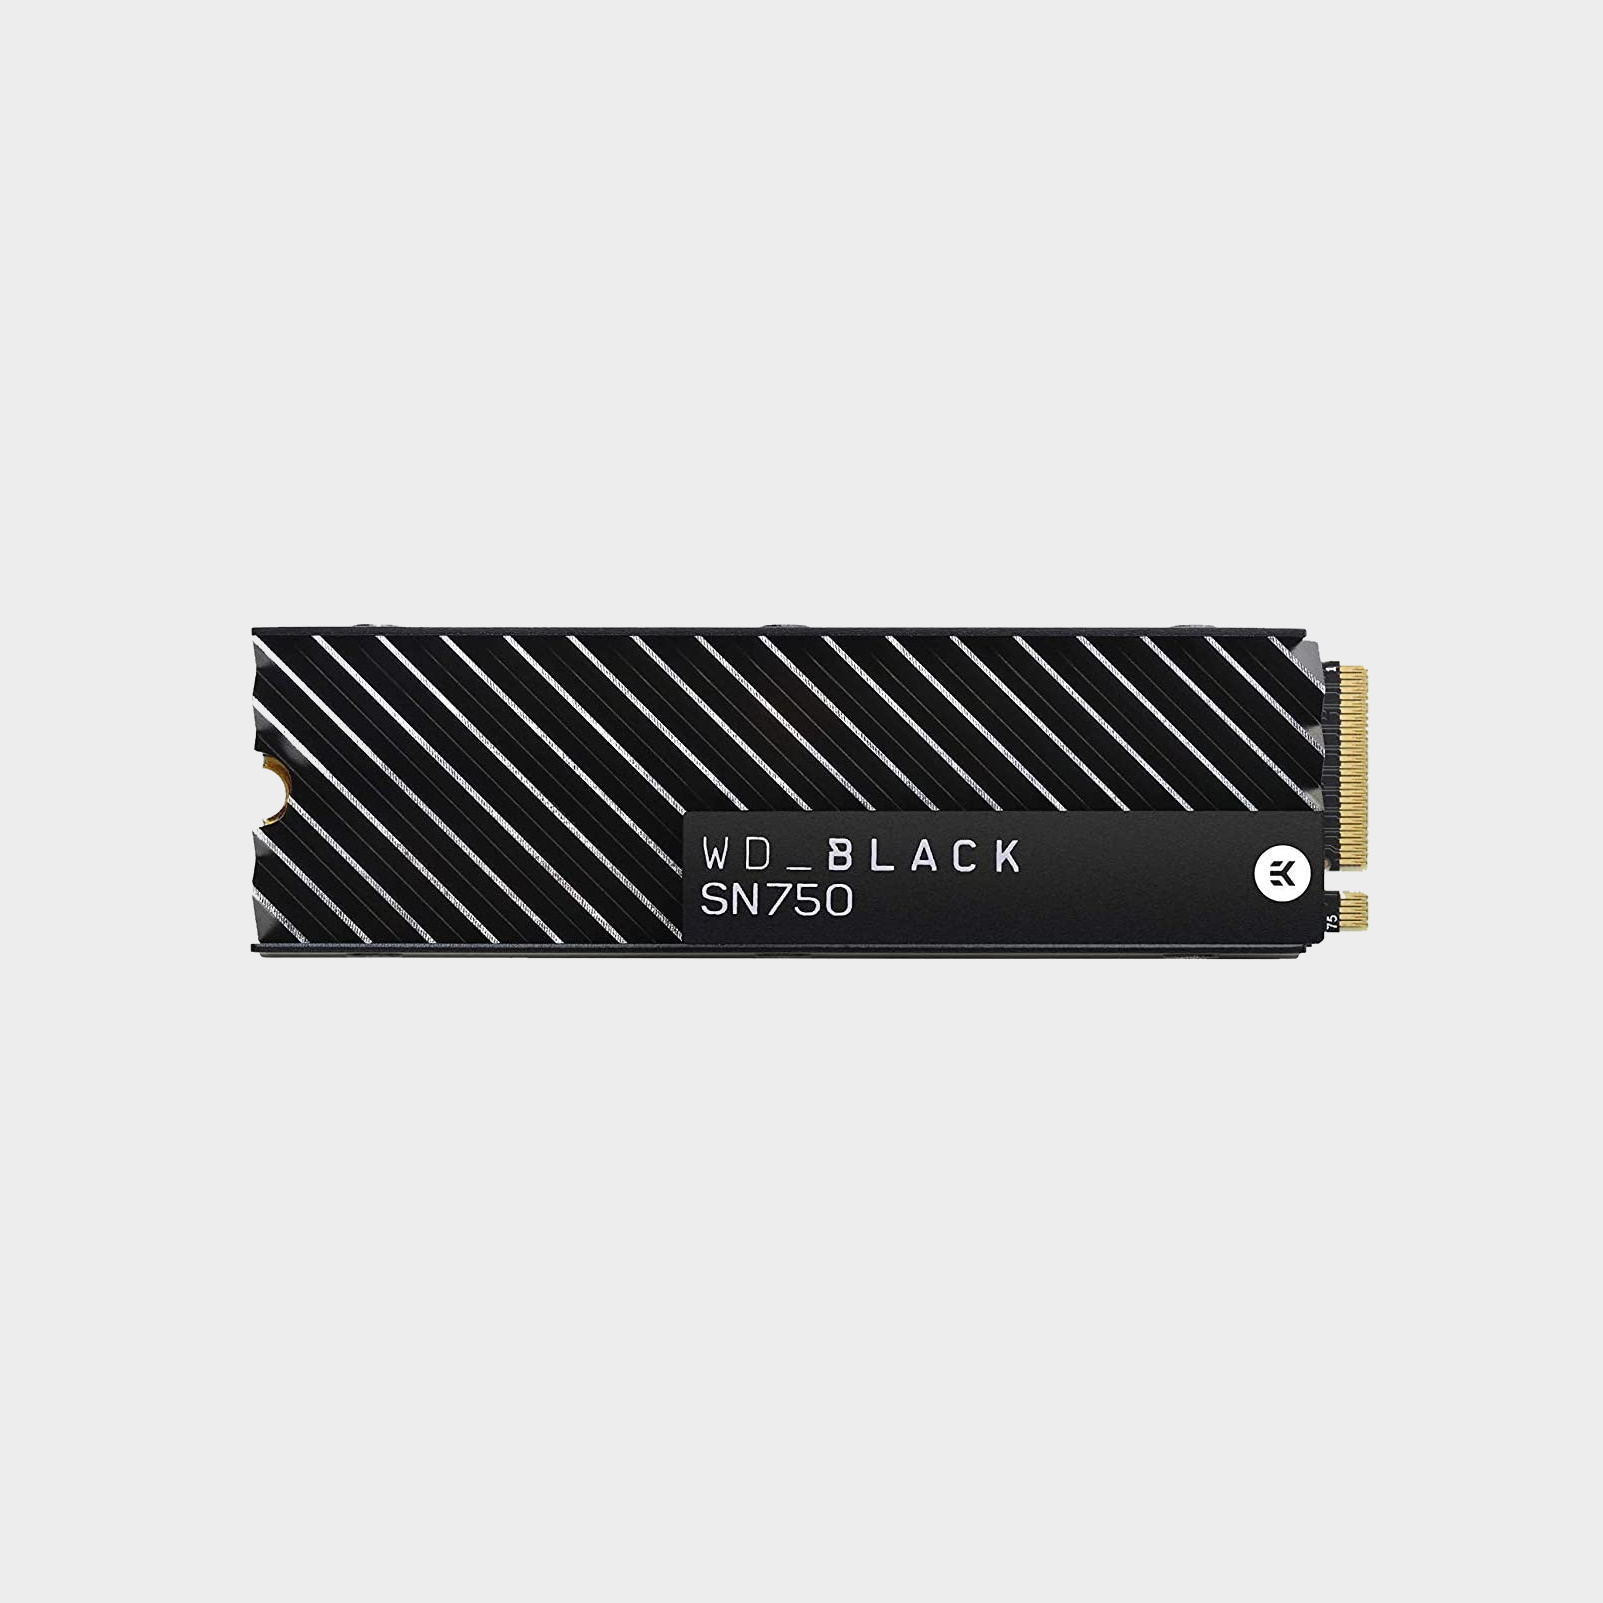 Best NVMe SSD for gaming in 2022